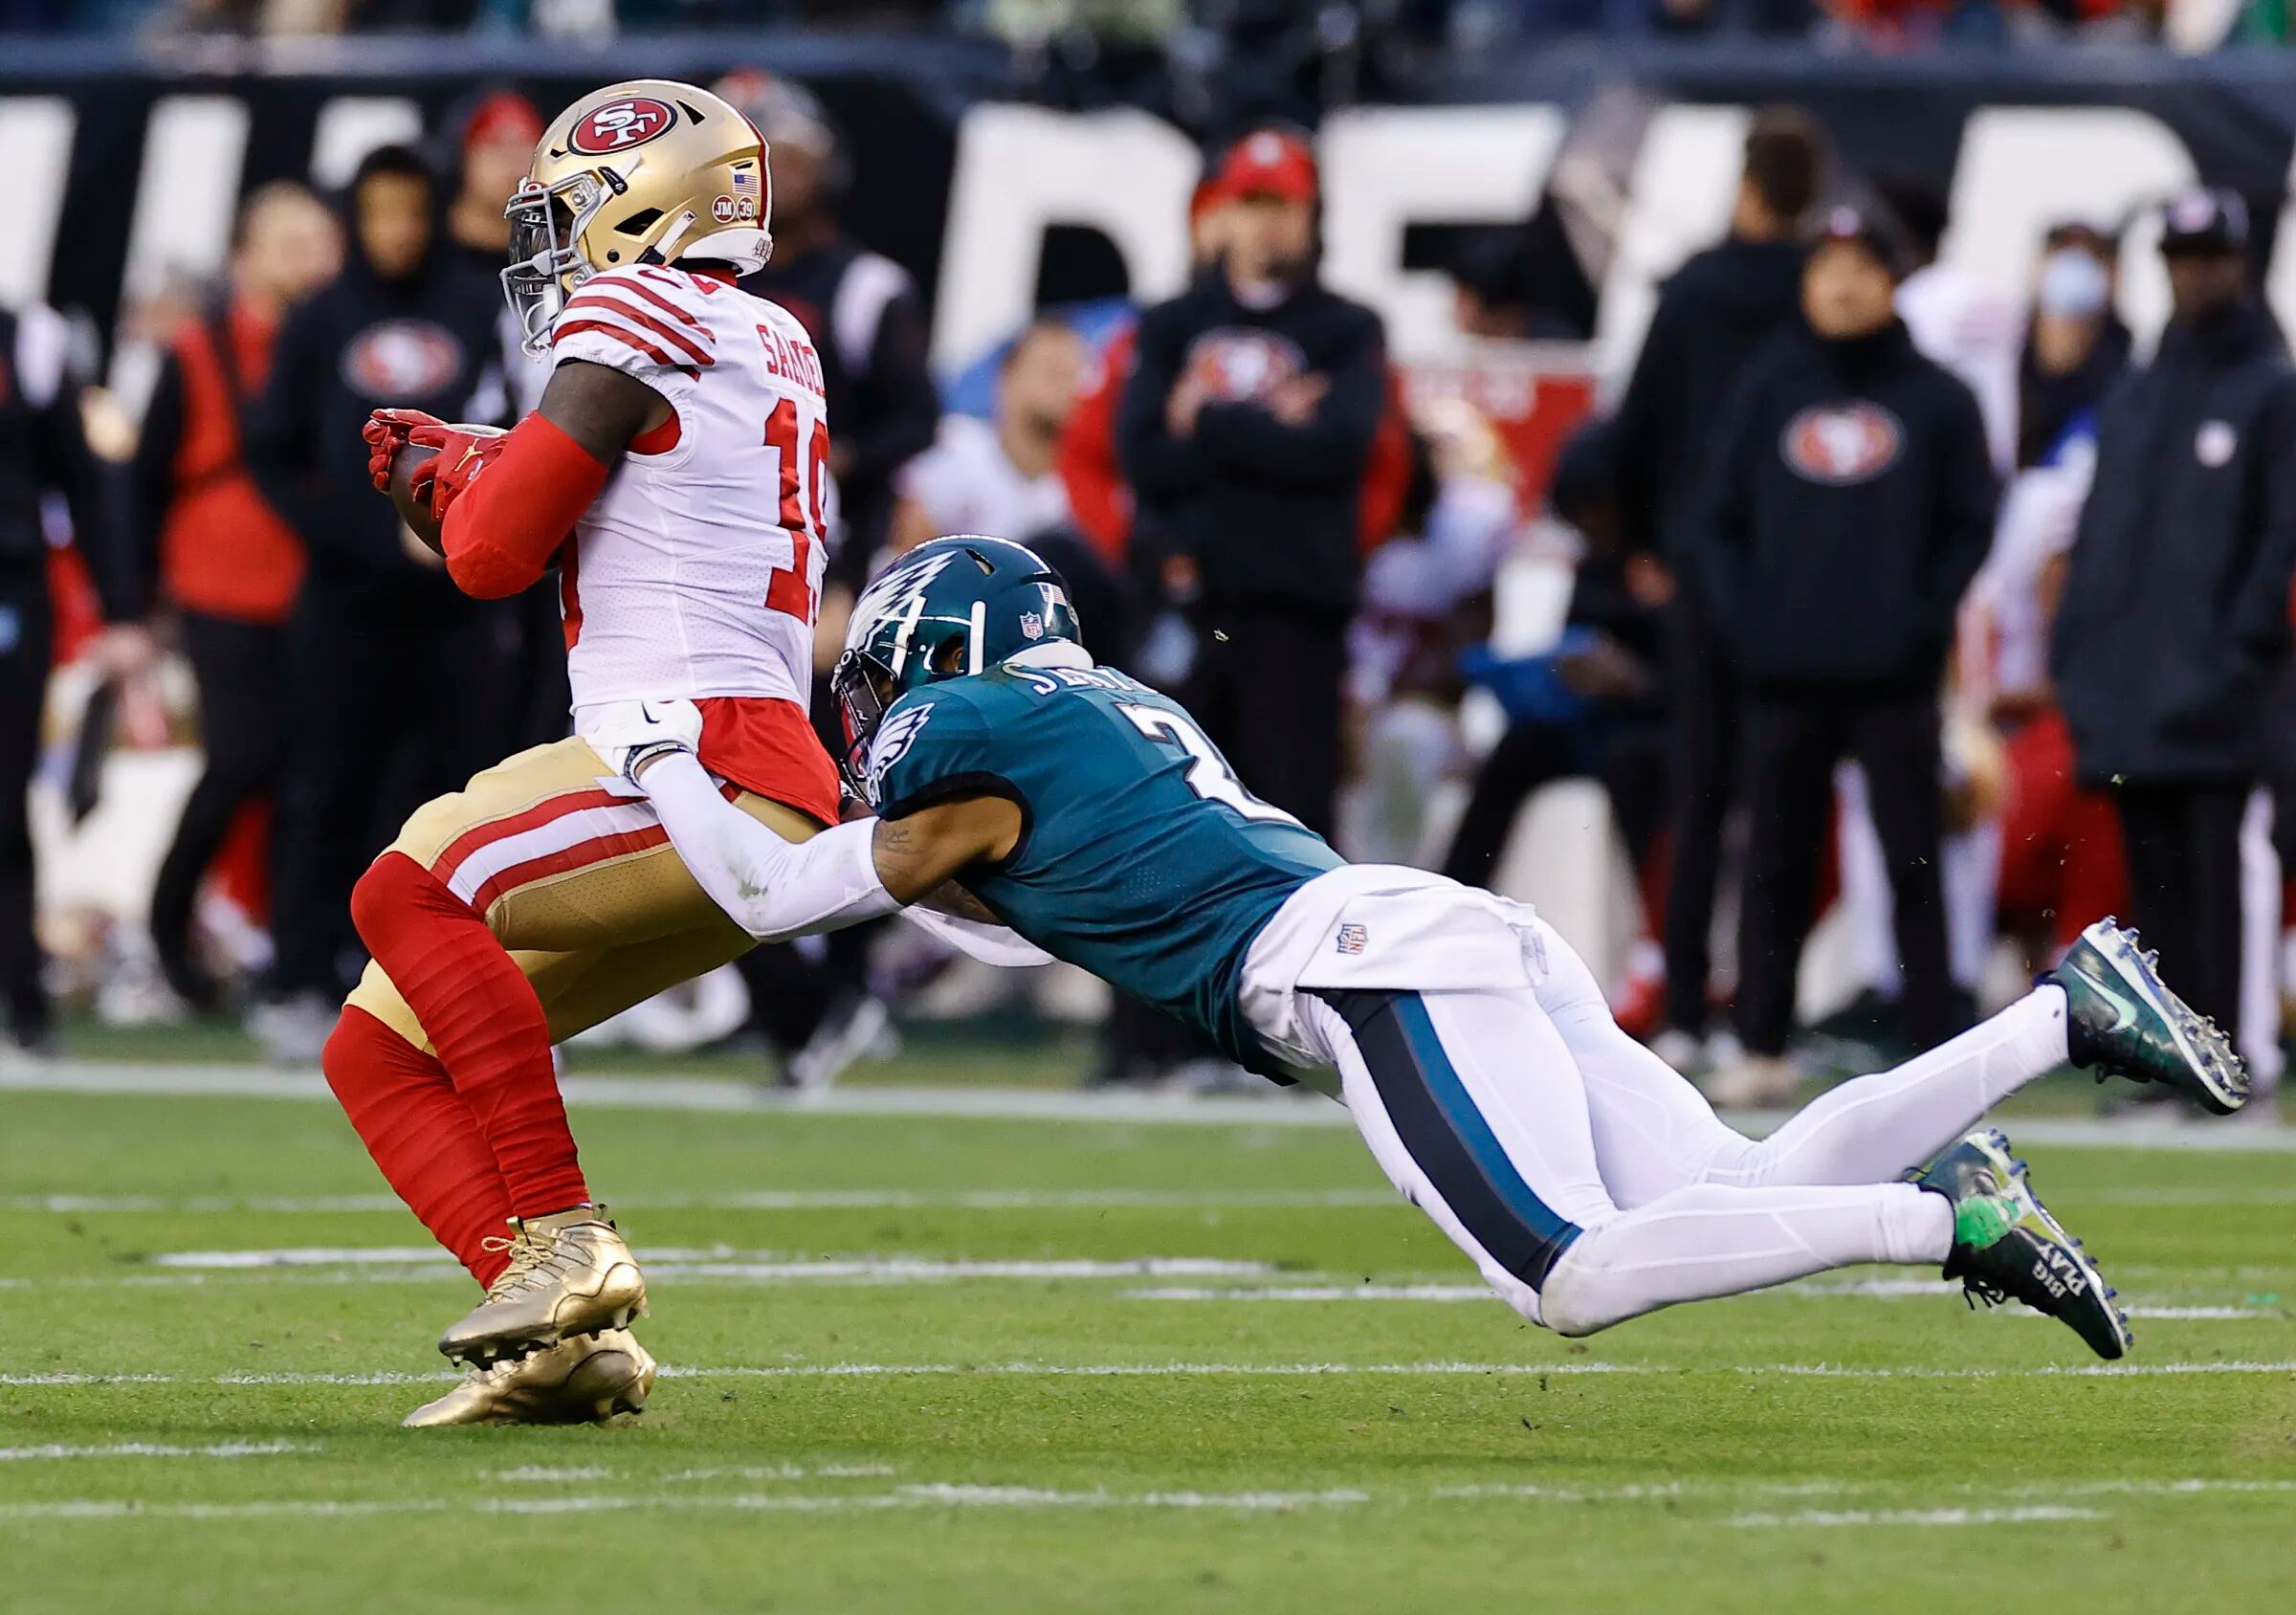 Eagles cornerback Darius Slay stops San Francisco 49ers wide receiver Deebo Samuel during the NFC Championship game on January 29.